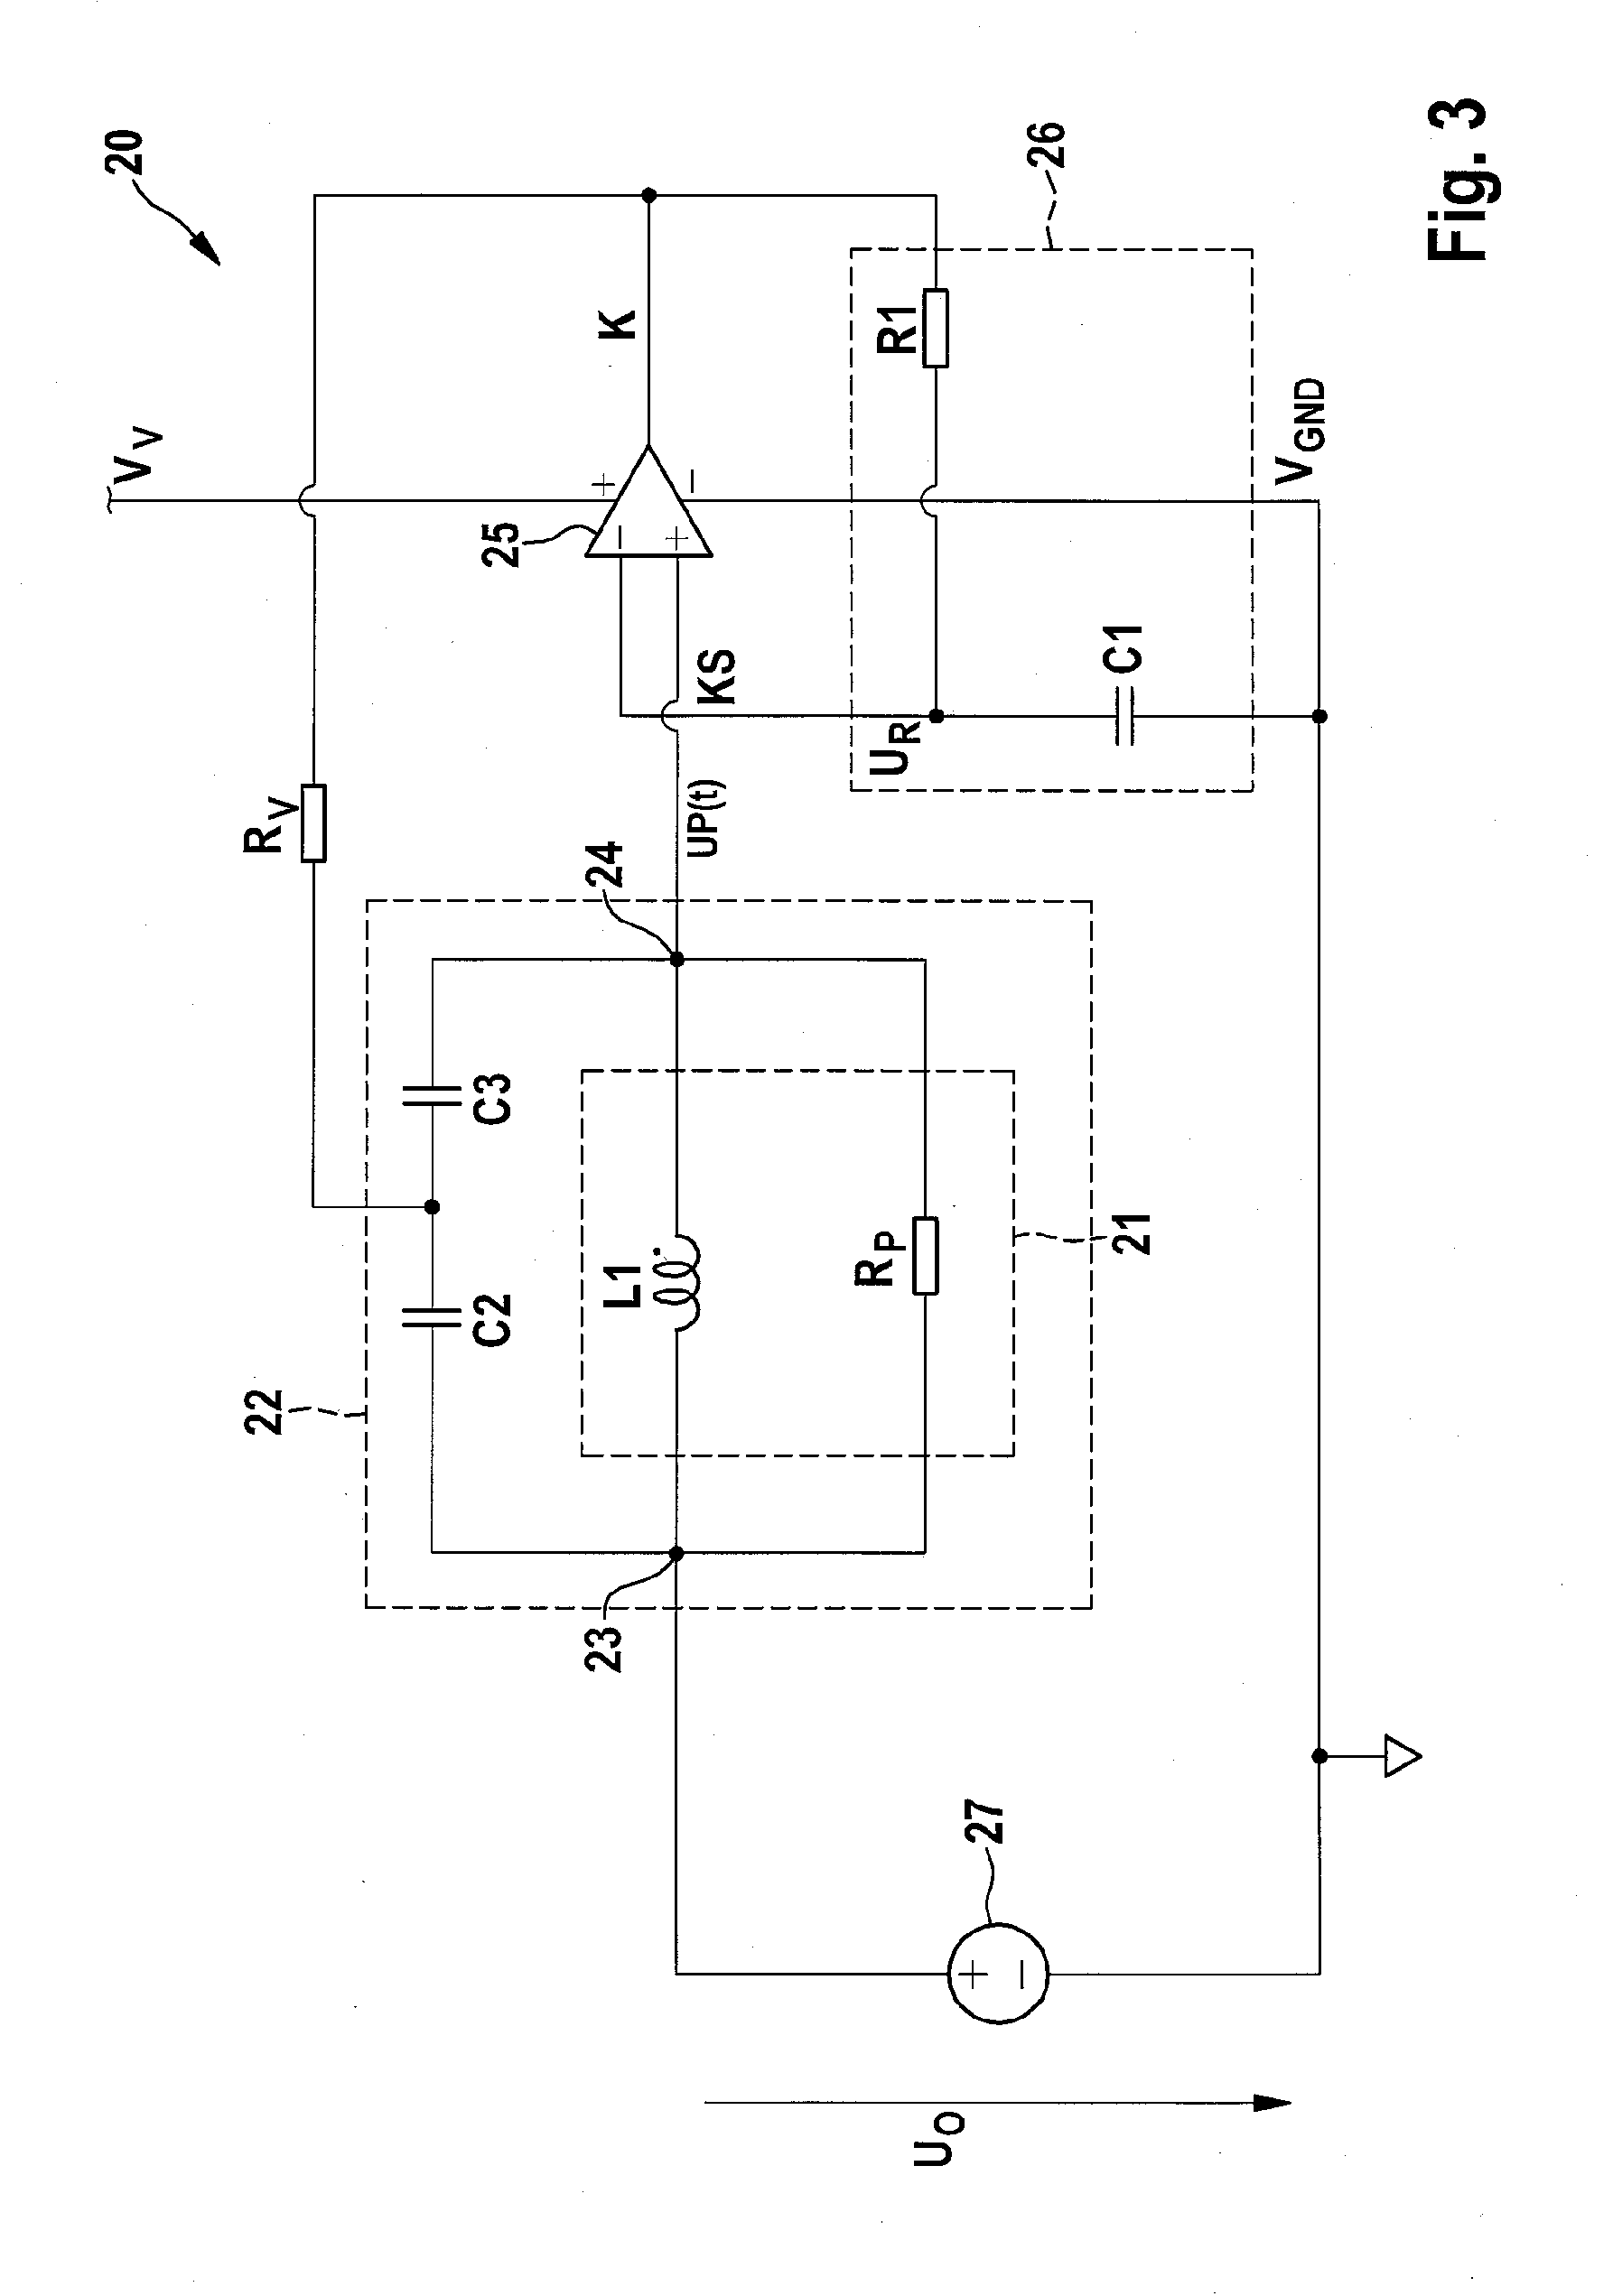 Method and circuit for evaluating a physical quantity detected by a sensor